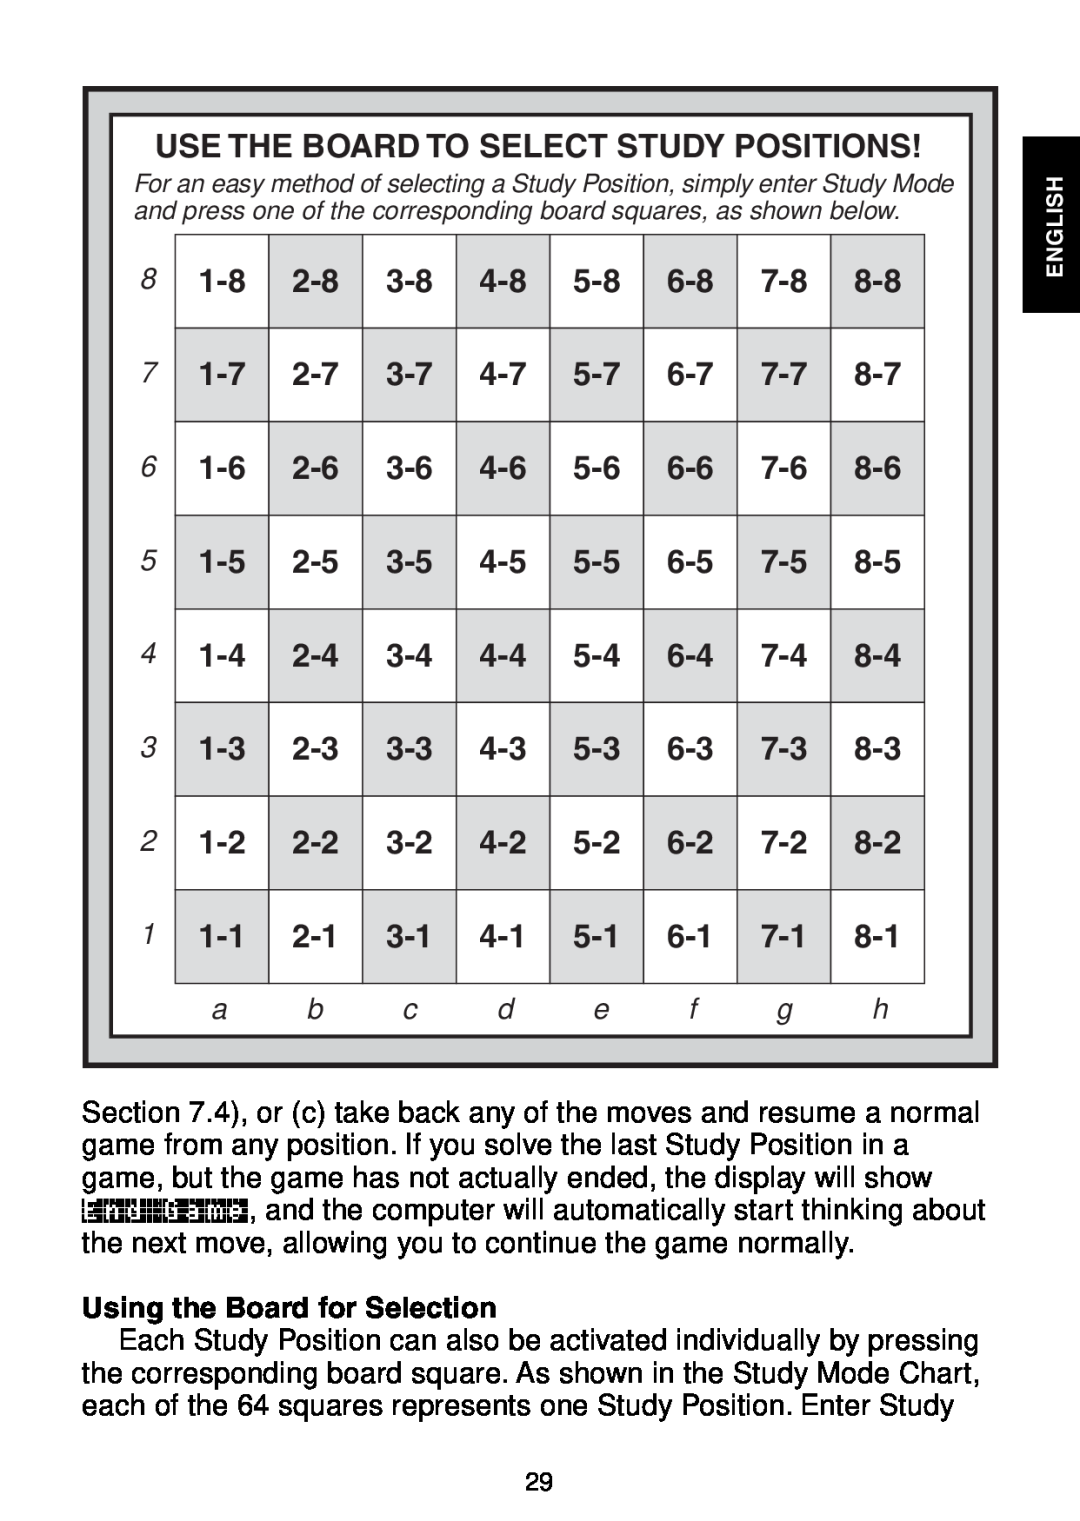 Saitek Maestro Travel Chess Computer manual Use The Board To Select Study Positions 